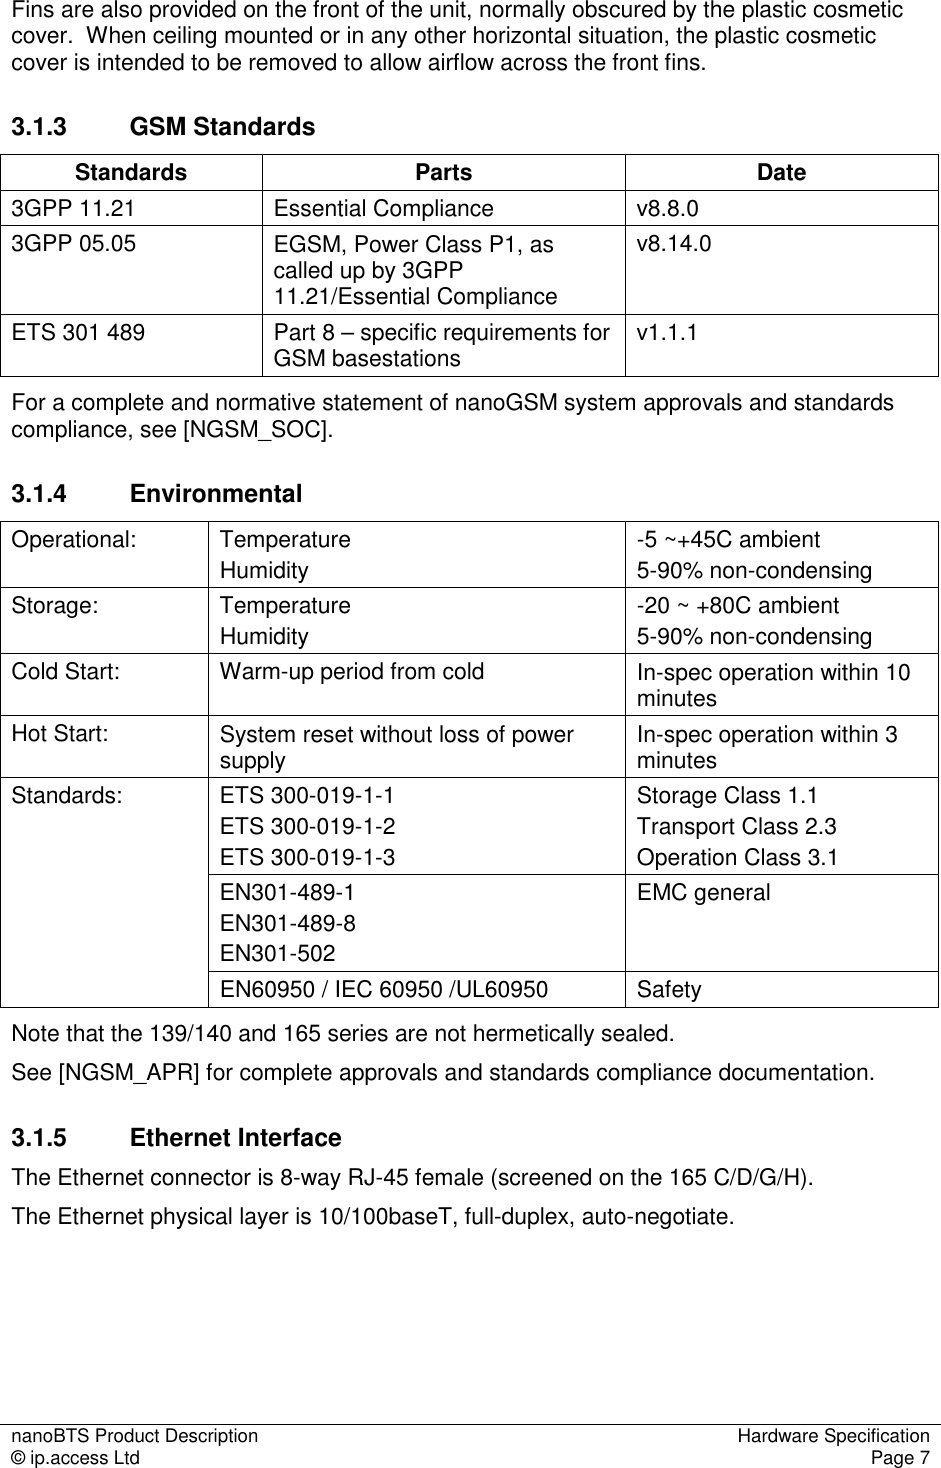 nanoBTS Product Description  Hardware Specification © ip.access Ltd  Page 7  Fins are also provided on the front of the unit, normally obscured by the plastic cosmetic cover.  When ceiling mounted or in any other horizontal situation, the plastic cosmetic cover is intended to be removed to allow airflow across the front fins. 3.1.3  GSM Standards Standards  Parts  Date 3GPP 11.21  Essential Compliance  v8.8.0 3GPP 05.05  EGSM, Power Class P1, as called up by 3GPP 11.21/Essential Compliance v8.14.0 ETS 301 489  Part 8 – specific requirements for GSM basestations  v1.1.1 For a complete and normative statement of nanoGSM system approvals and standards compliance, see [NGSM_SOC]. 3.1.4  Environmental Operational:  Temperature Humidity -5 ~+45C ambient 5-90% non-condensing Storage:  Temperature Humidity -20 ~ +80C ambient 5-90% non-condensing Cold Start:  Warm-up period from cold  In-spec operation within 10 minutes Hot Start:  System reset without loss of power supply  In-spec operation within 3 minutes ETS 300-019-1-1 ETS 300-019-1-2 ETS 300-019-1-3 Storage Class 1.1 Transport Class 2.3 Operation Class 3.1 EN301-489-1 EN301-489-8 EN301-502 EMC general Standards: EN60950 / IEC 60950 /UL60950  Safety Note that the 139/140 and 165 series are not hermetically sealed. See [NGSM_APR] for complete approvals and standards compliance documentation. 3.1.5  Ethernet Interface The Ethernet connector is 8-way RJ-45 female (screened on the 165 C/D/G/H). The Ethernet physical layer is 10/100baseT, full-duplex, auto-negotiate. 